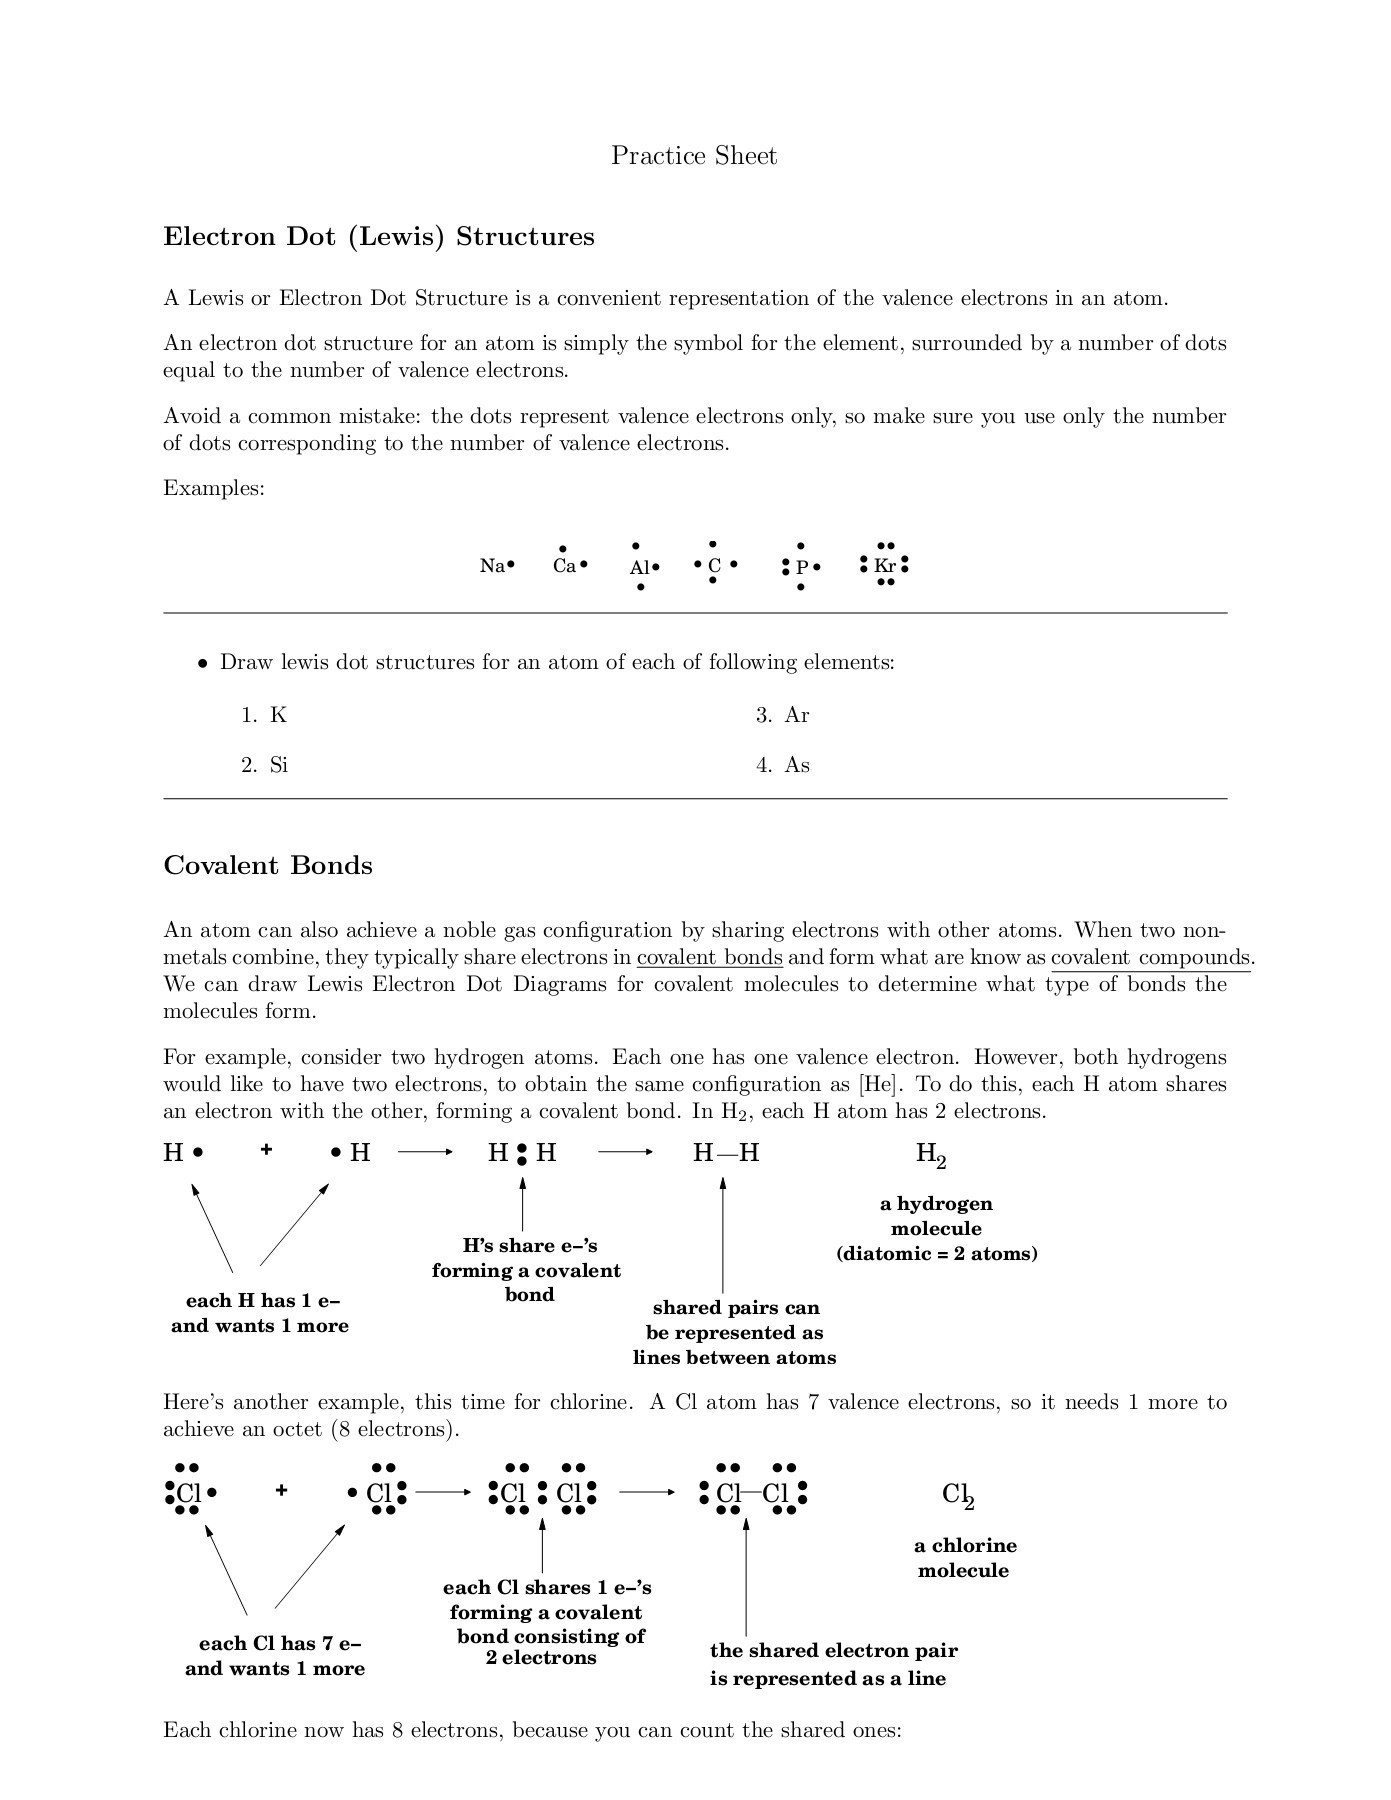 Lewis Structure Worksheet with Answers Electron Dot Lewis Structures Pages 1 4 Text Version